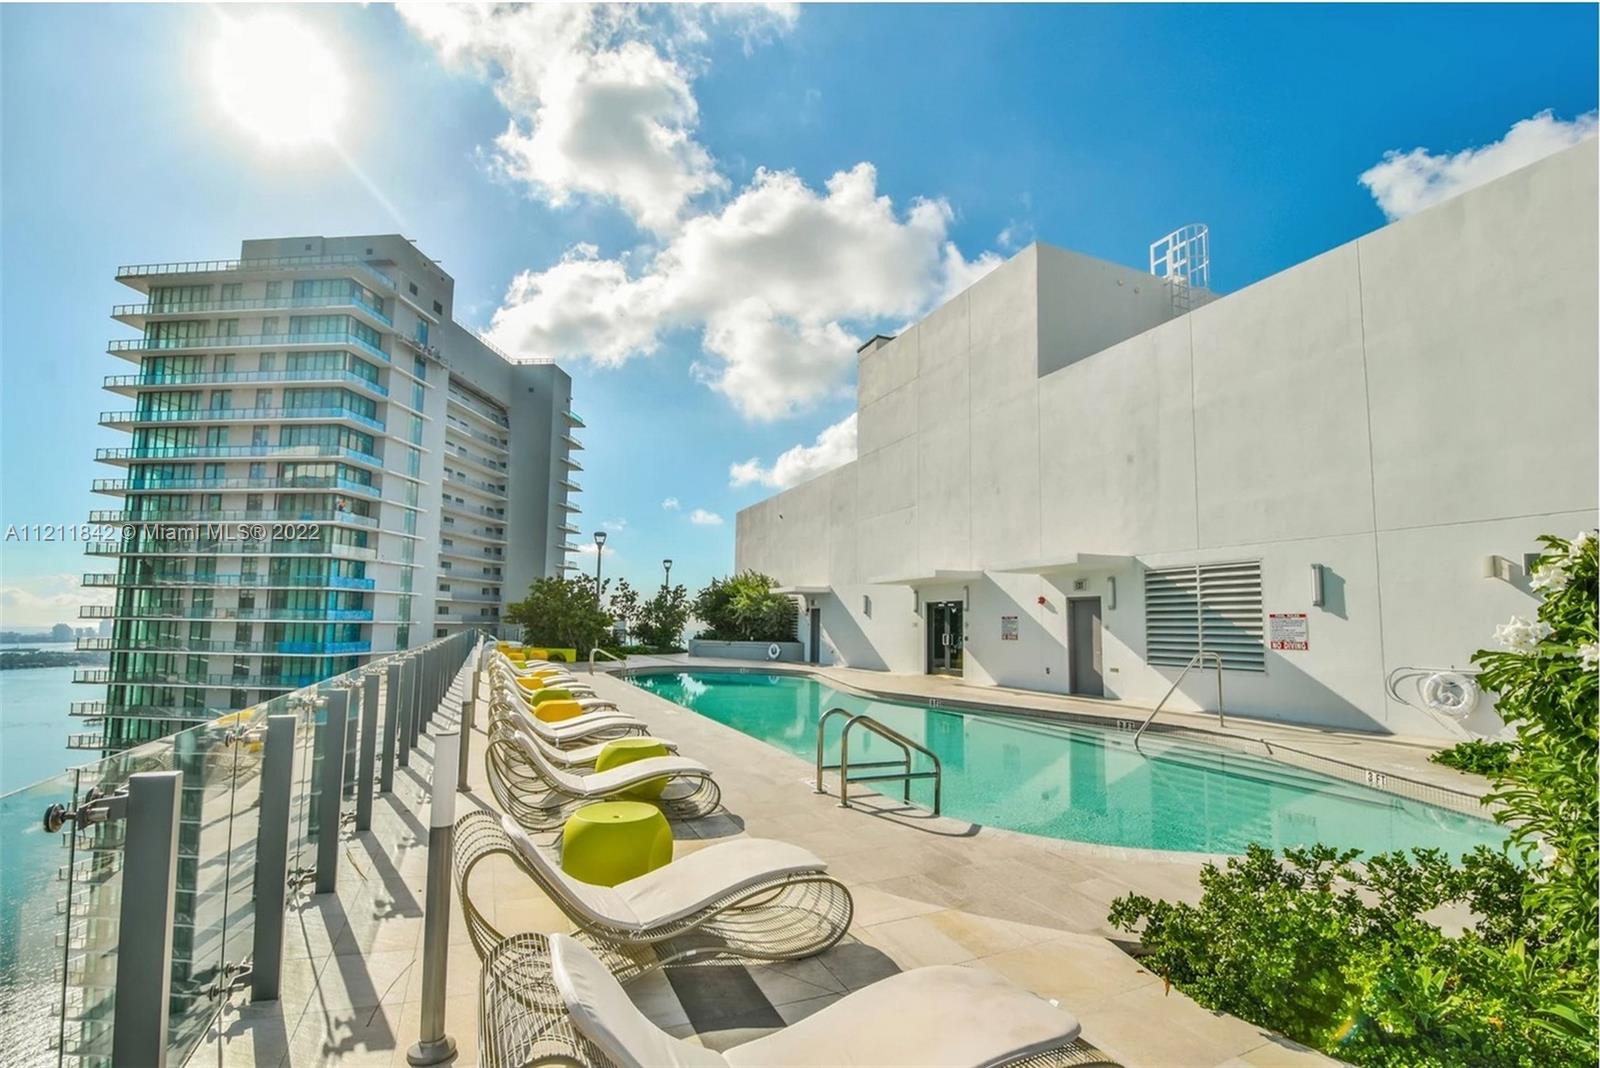 Amazing Huge 3 Bedroom 2 Bath in Brand New Buidling, Paraiso Bayviews, in Miami Edgewater/Midtown. Breathtaking views from the 2 balconies in the unit and the Rooftop Pool and Jacuzzi on the 46th floor with 360 views of Miami and resort-style towel service!! Enjoy access to all 5-star amenities including lounge pools, cabanas, tennis court, party rooms and more! Includes 1 assigned parking spot in garage. This unit has amazing views of the bay & ocean from the 31st floor and features porcelain flooring throughout, a total of 4 beds with a king-size bed in the master, 2 twin beds in the 2nd bedroom, (can use apart or separate), queen-size sofa-bed in the converted den. Ultra-Luxury, Ultra-Modern building with 24-hour security, front desk and valet.